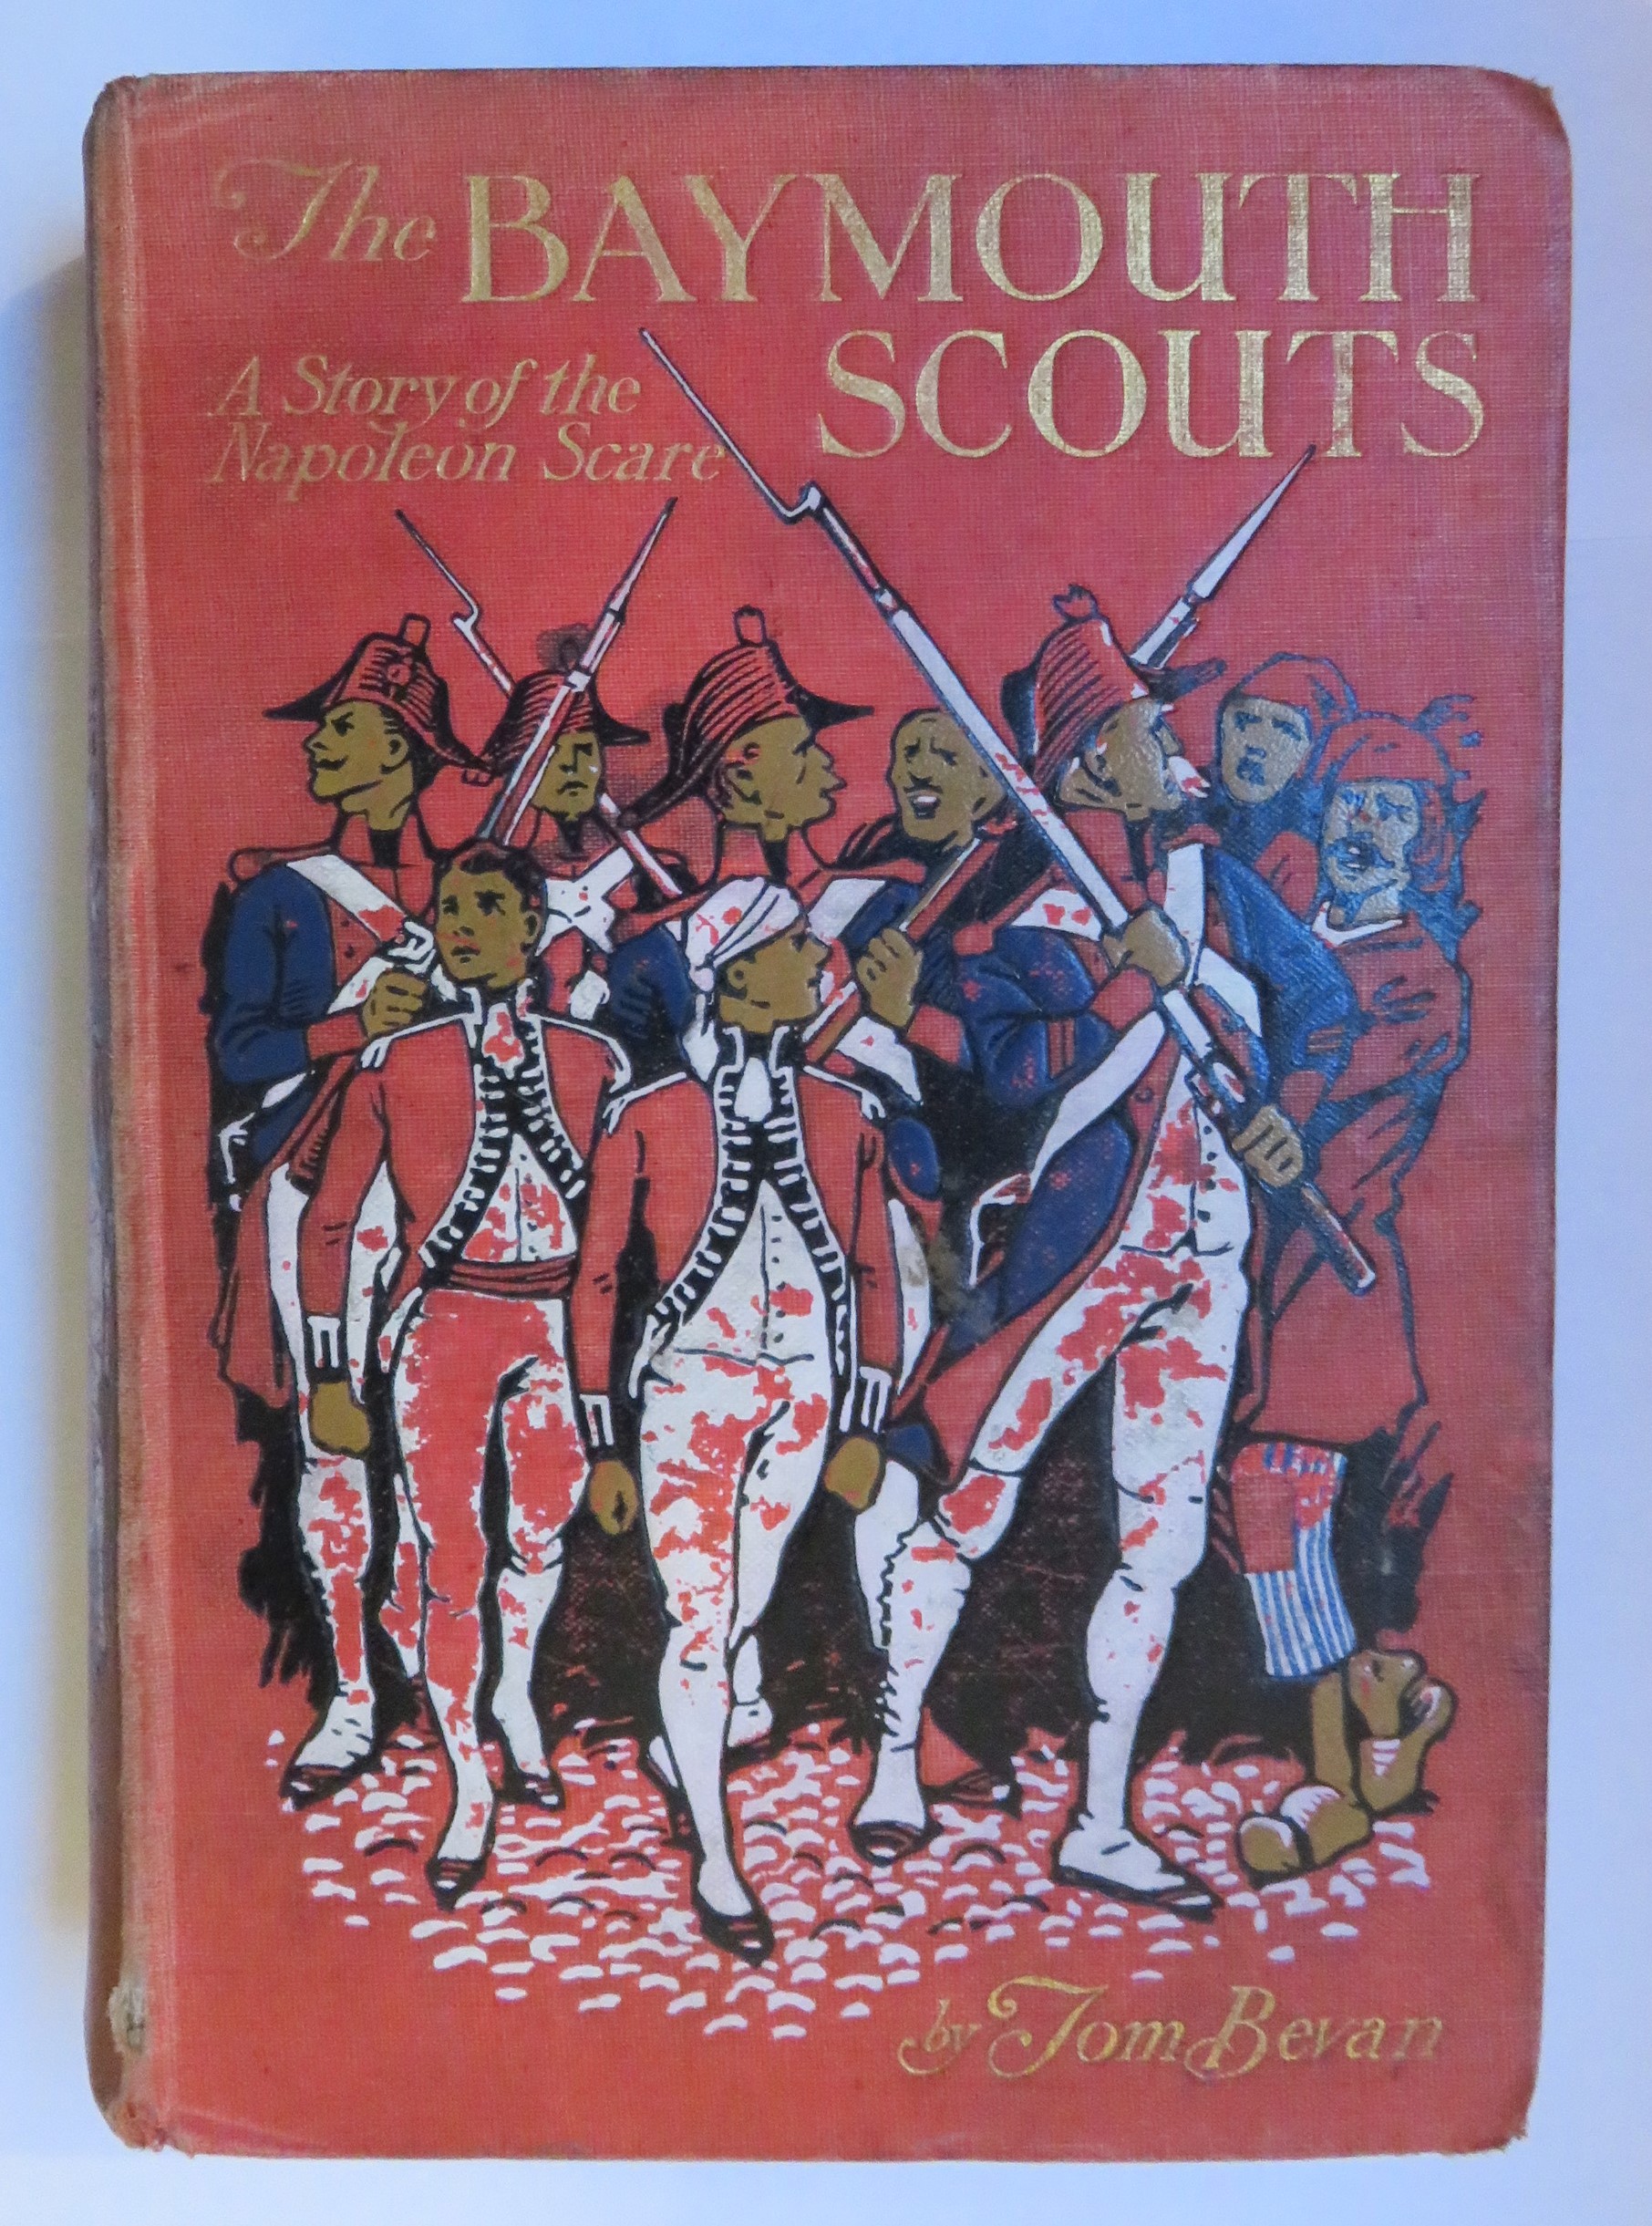 The Baymouth Scouts 